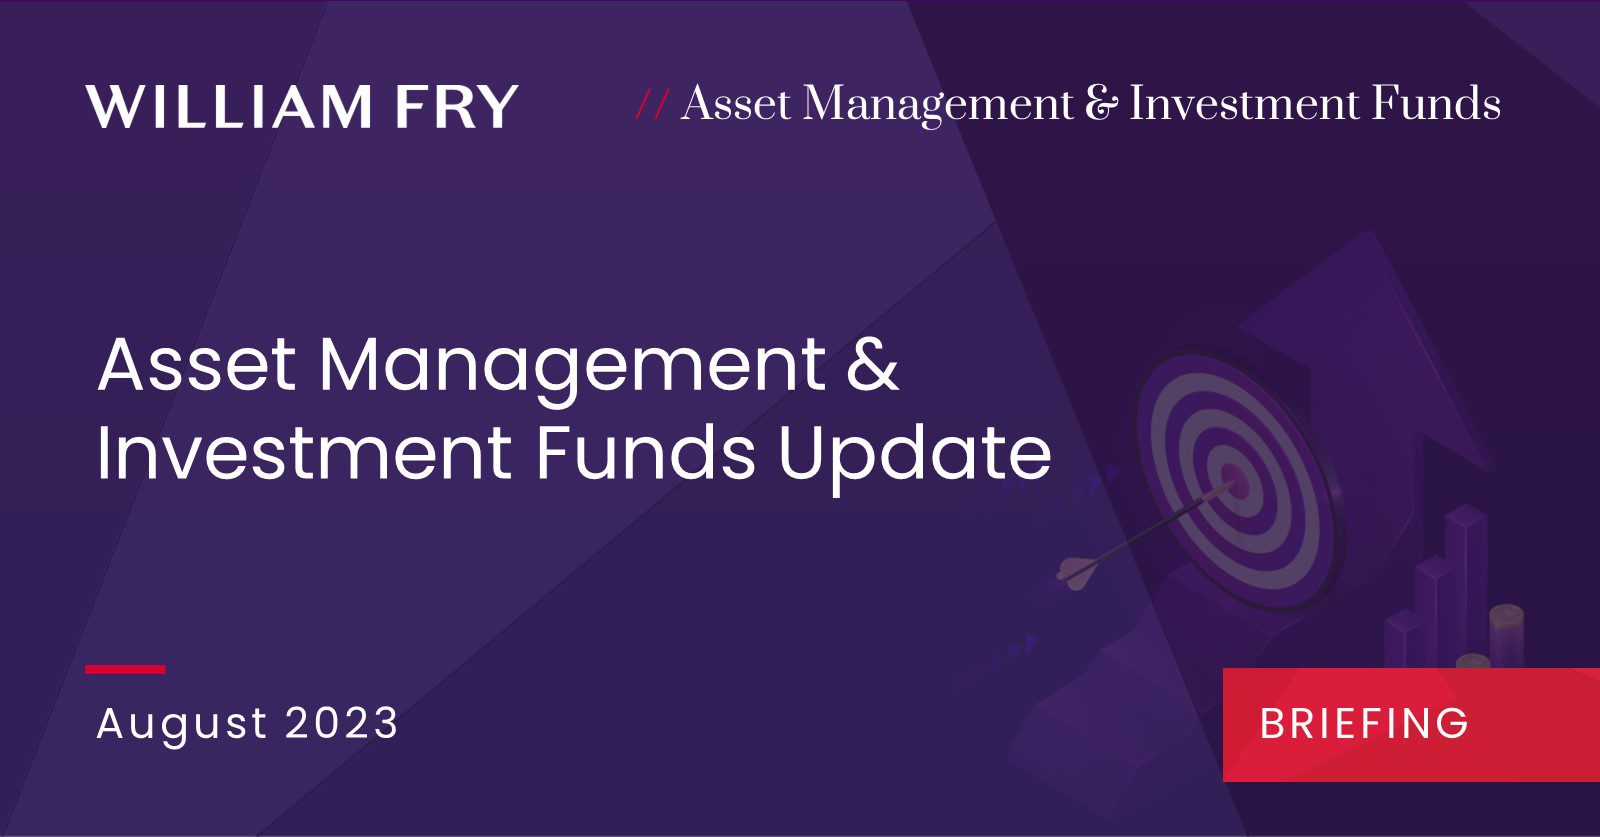 Asset Management & Investment Funds Update - August 2023